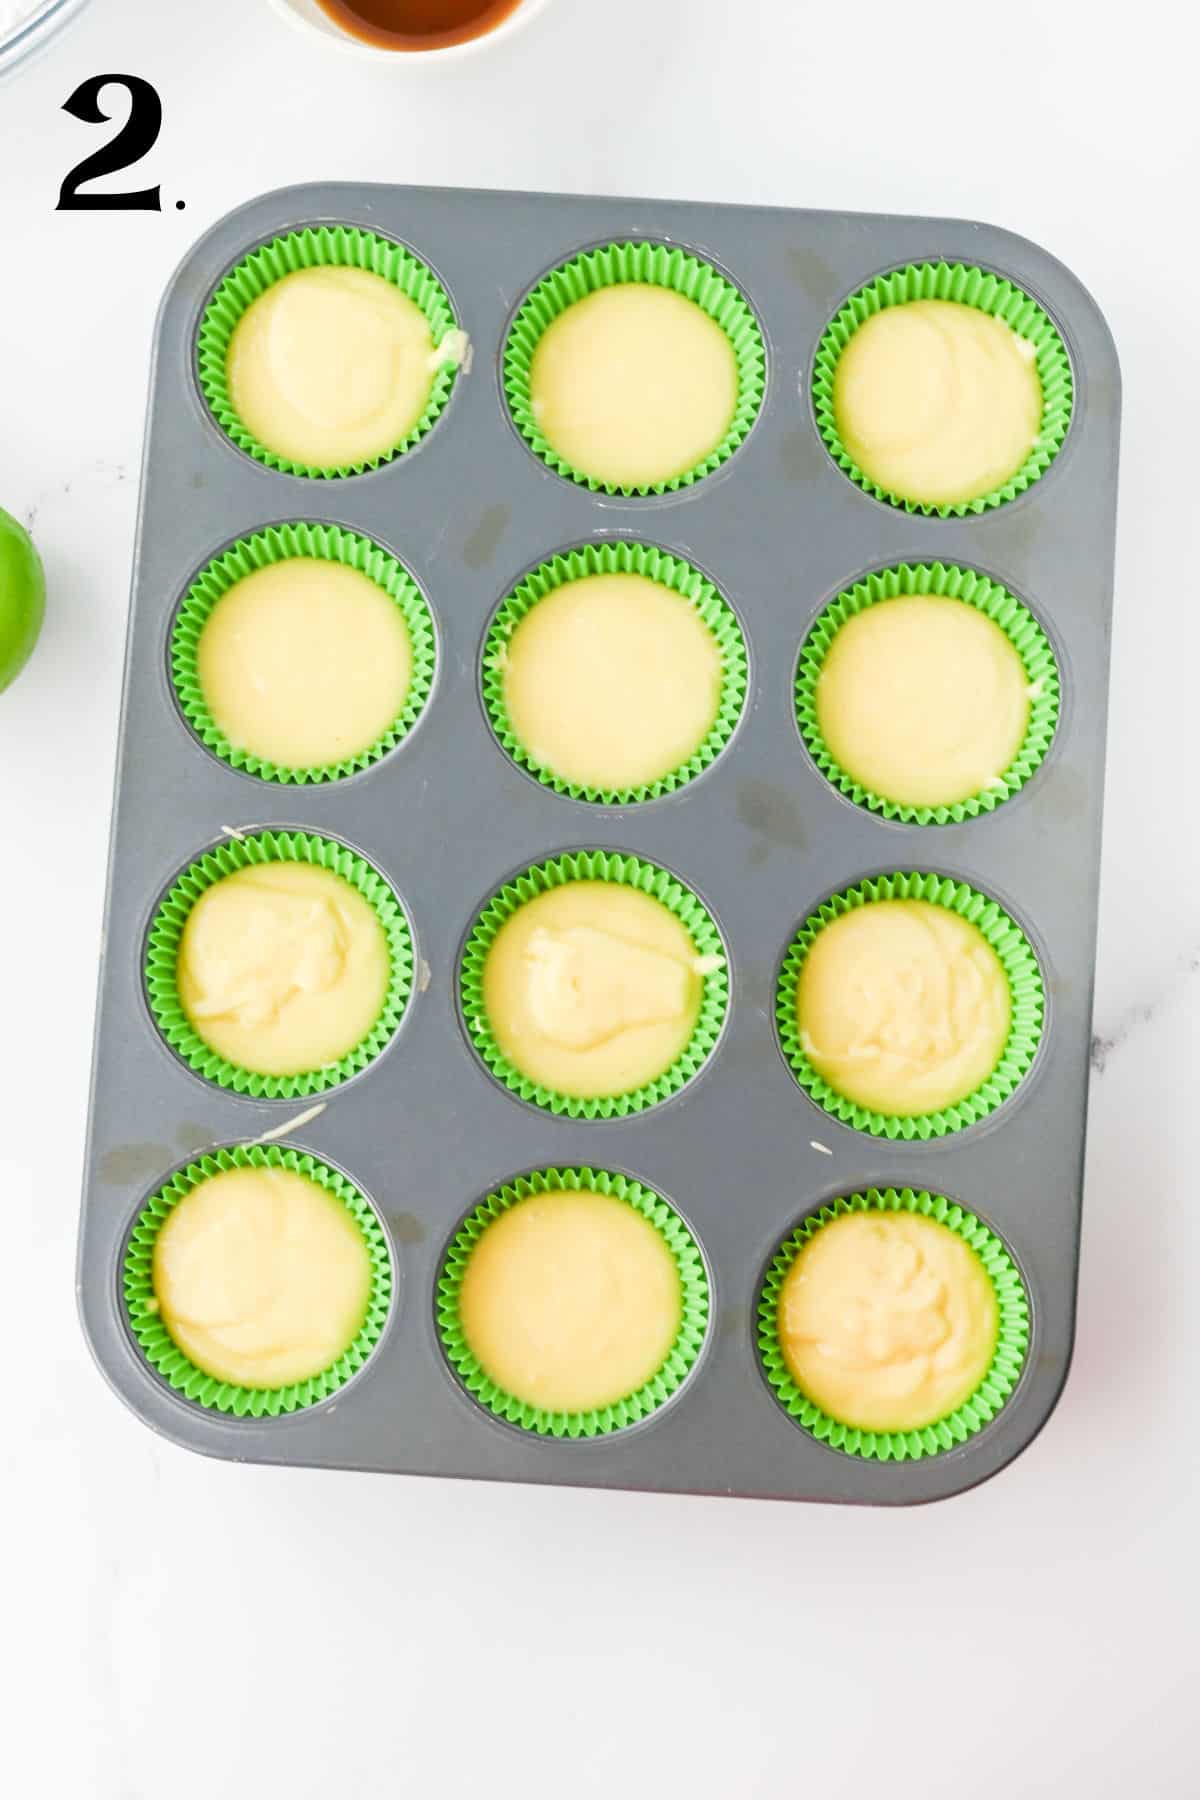 How to make Tequila Cupcakes - step 2 - pour batter in lined cupcake tin.